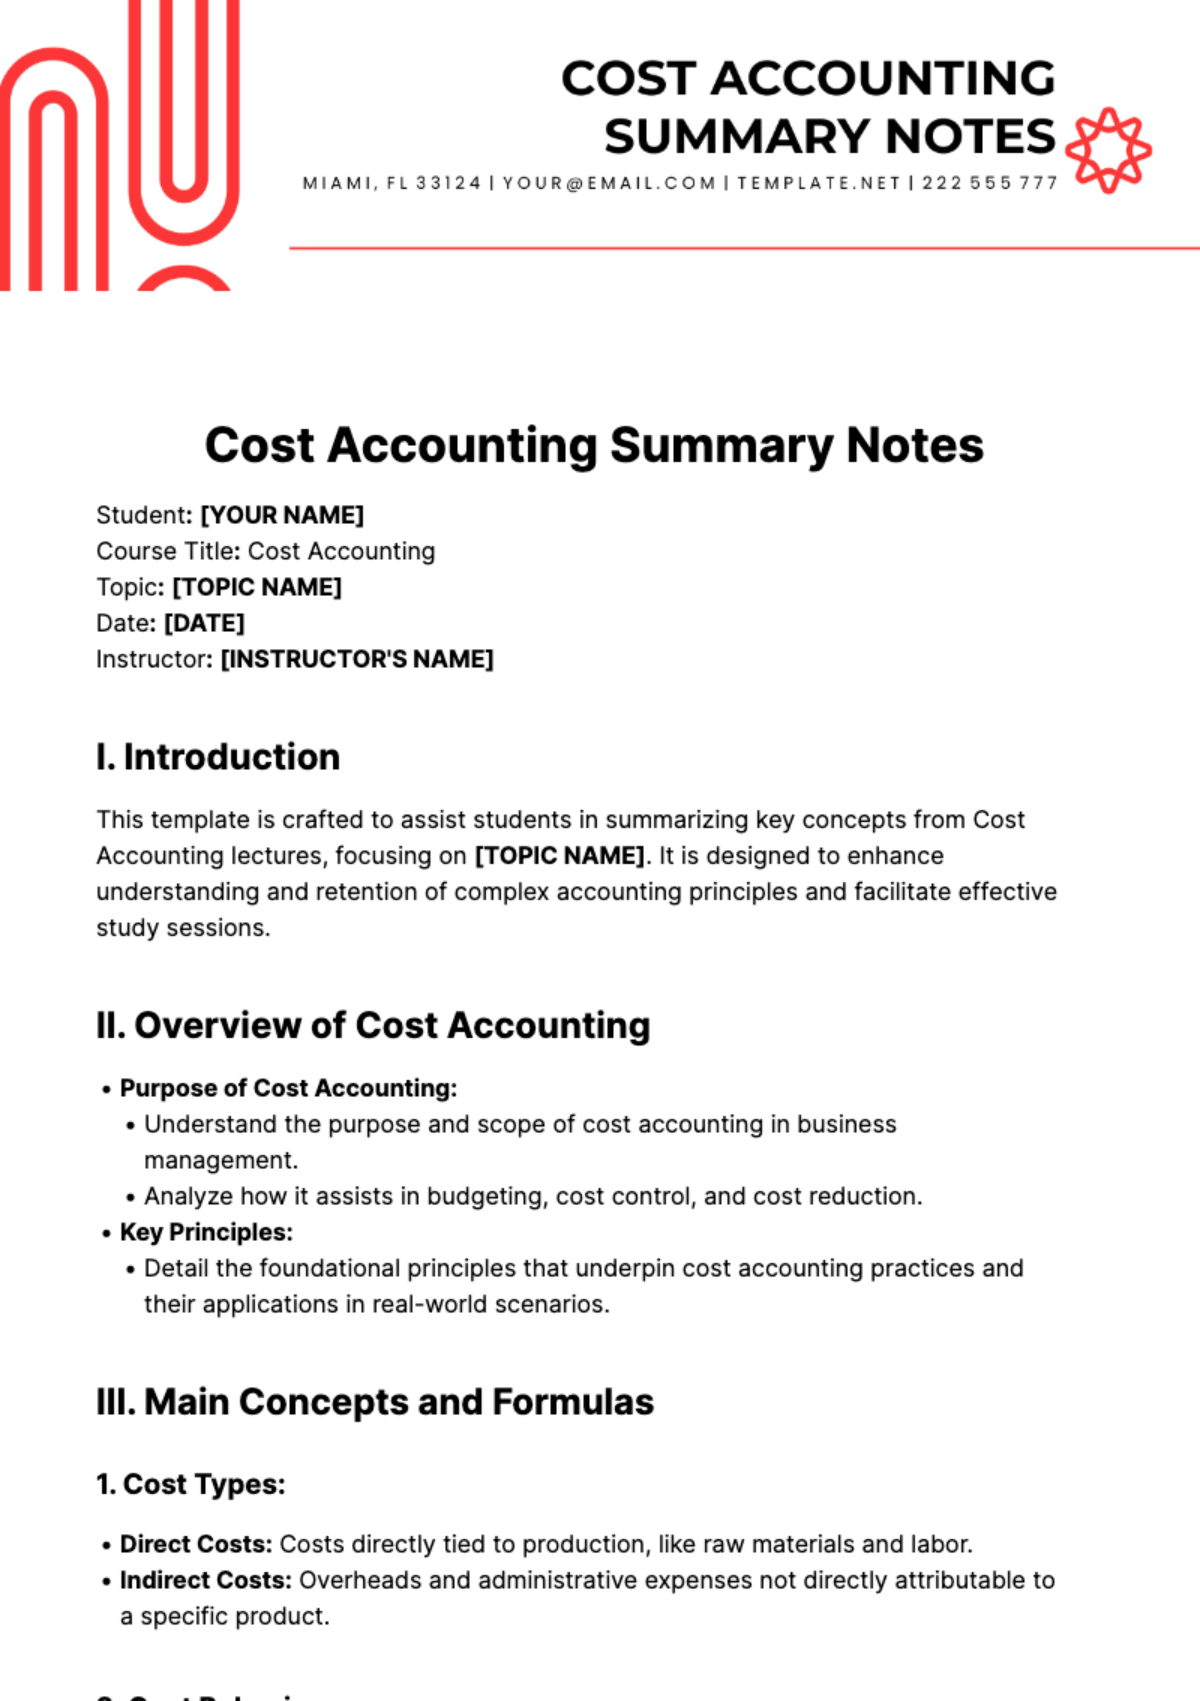 Free Cost Accounting Summary Notes Template